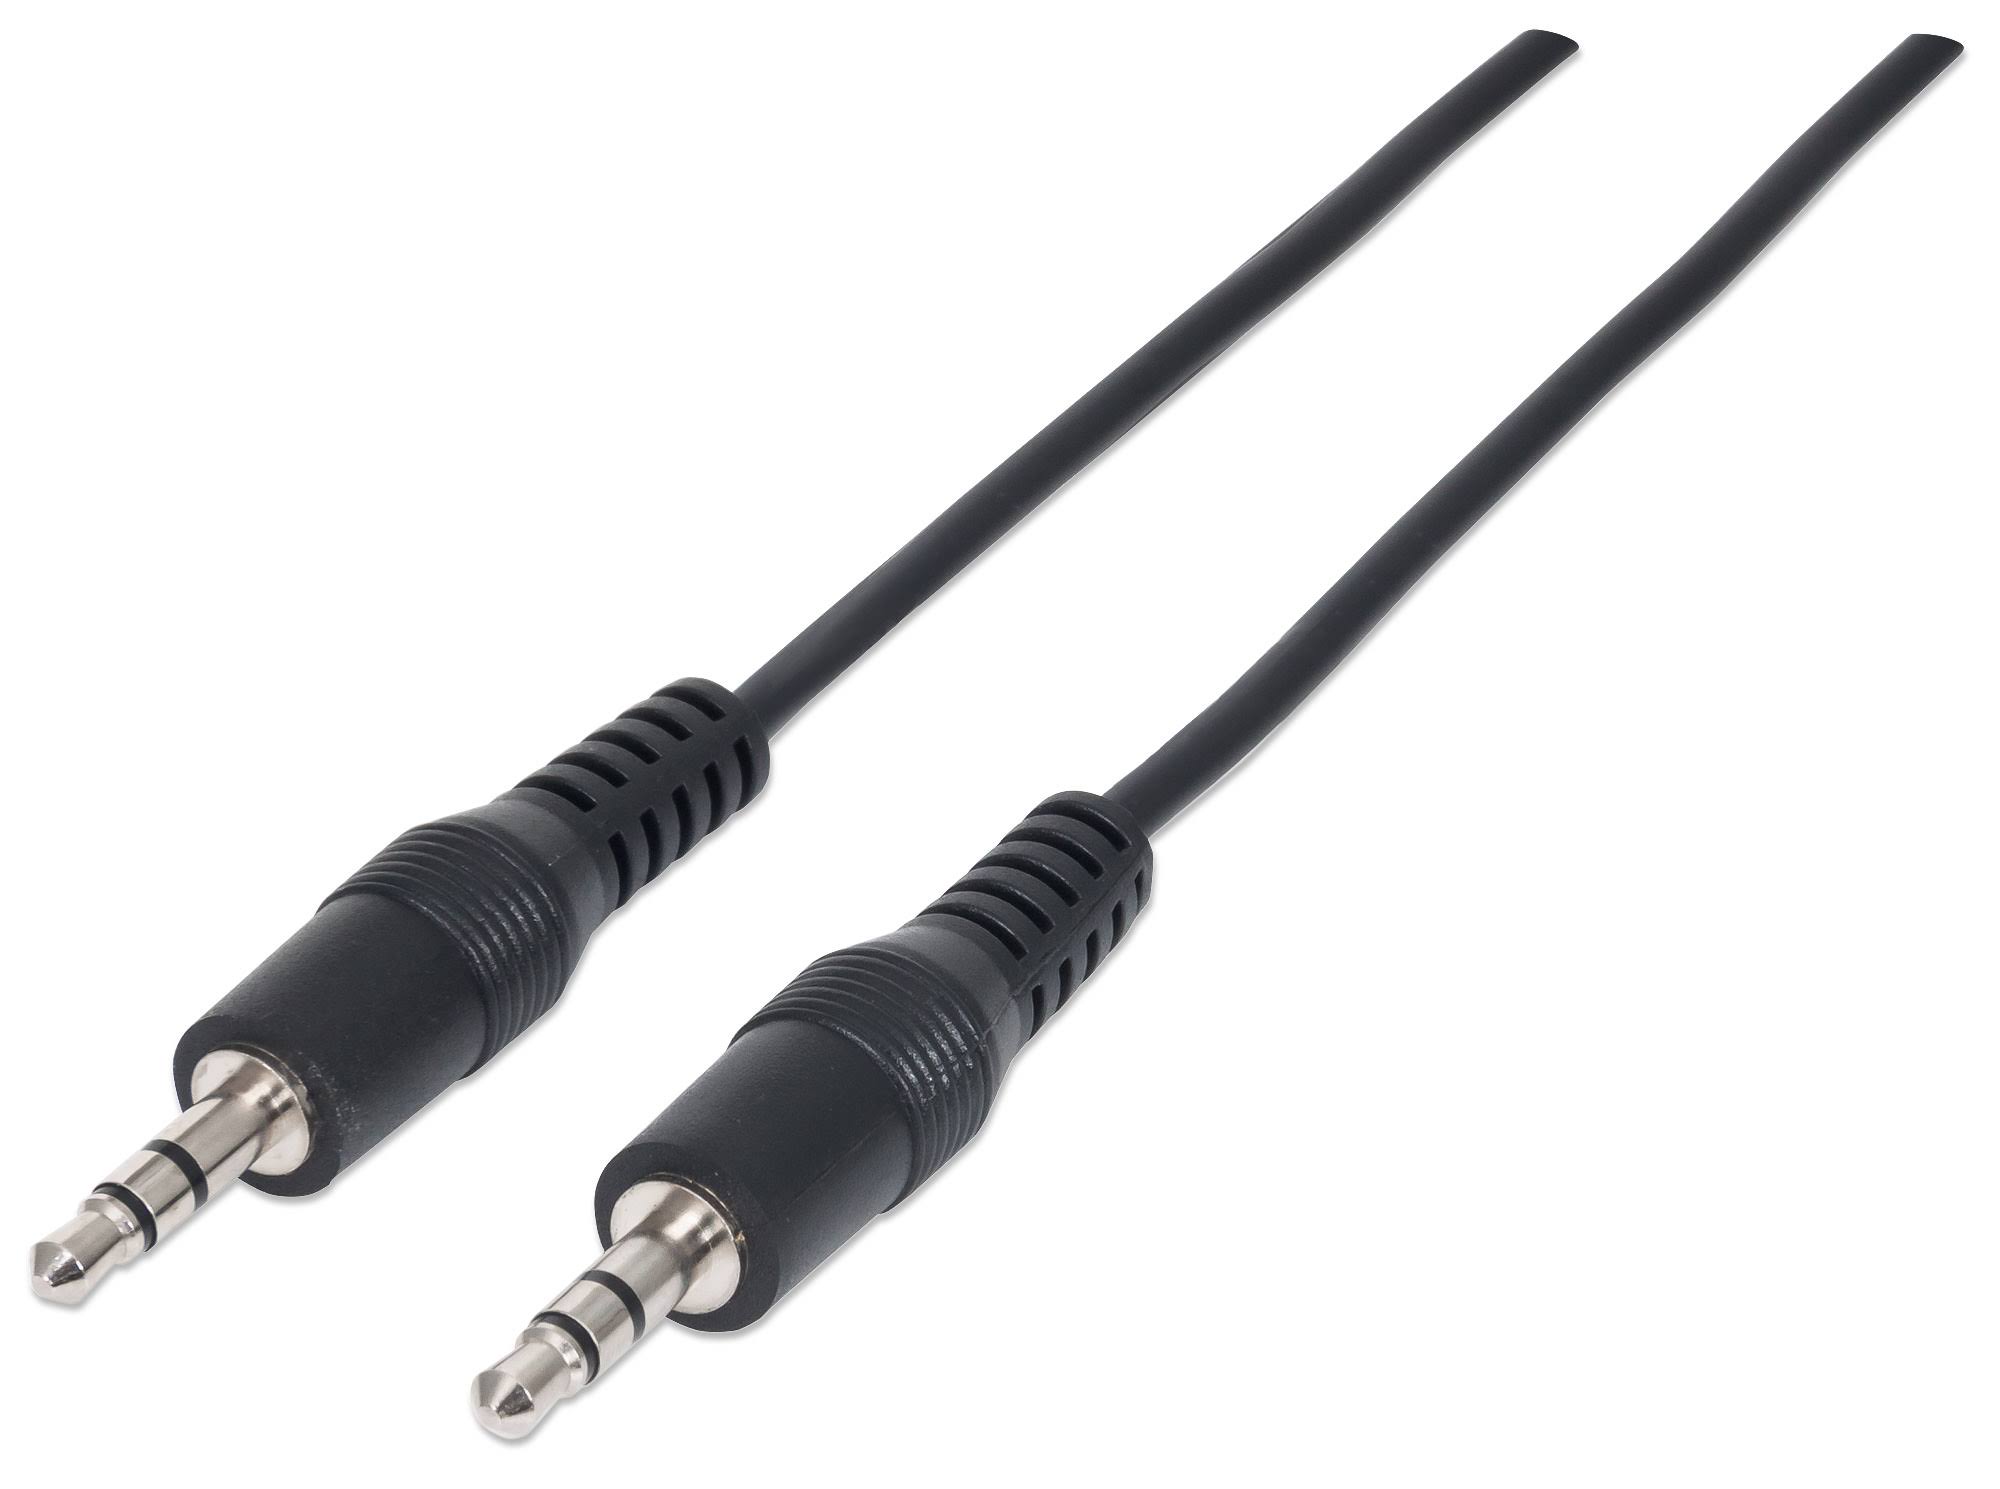 Manhattan 3.5 Mm Stereo Male To Male Audio Cable, 6 Ft, Black - 6 Ft - 1 X Mini-phone